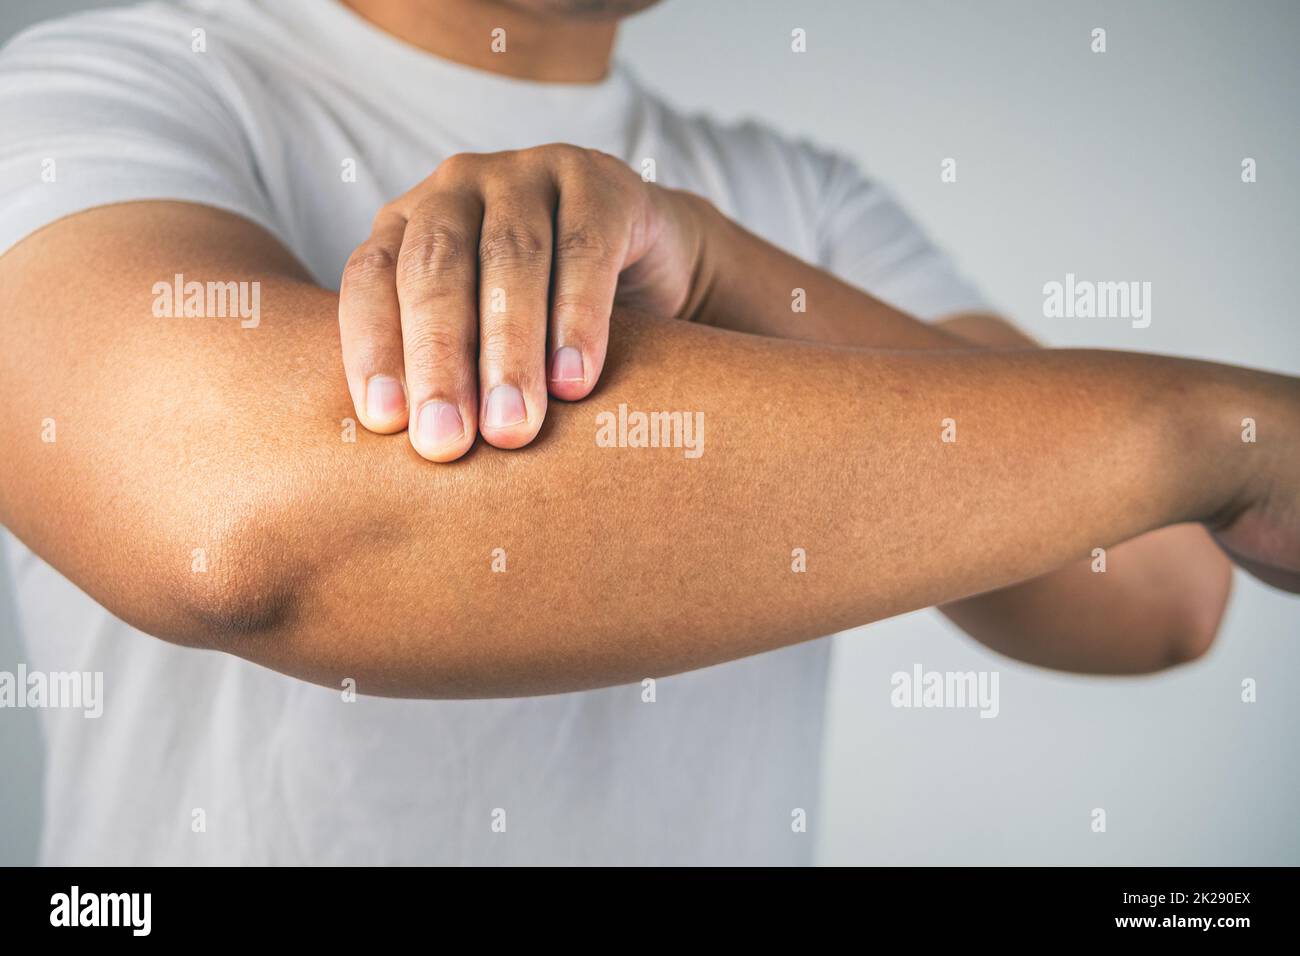 Tennis elbow concept. The man uses fingers to massage his arm. Healthcare knowledge. Medium close up shot. Stock Photo